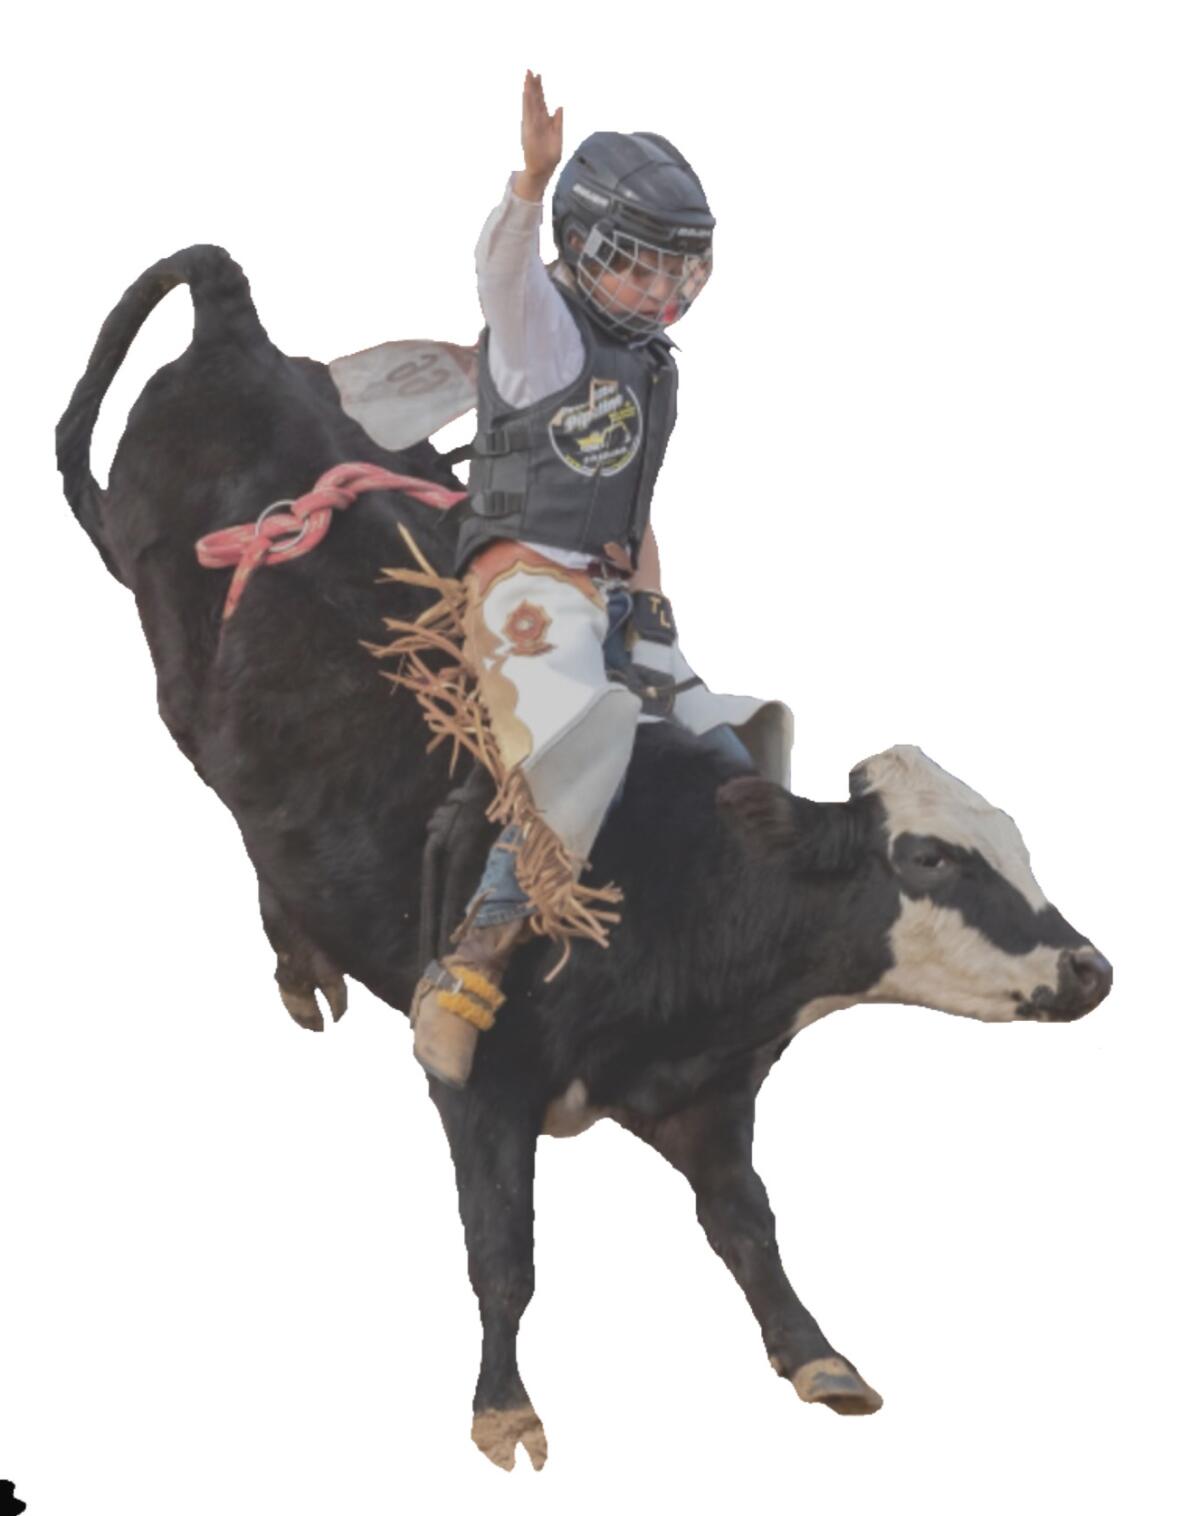 Tristan Ludwig shows off his bull-riding skills.